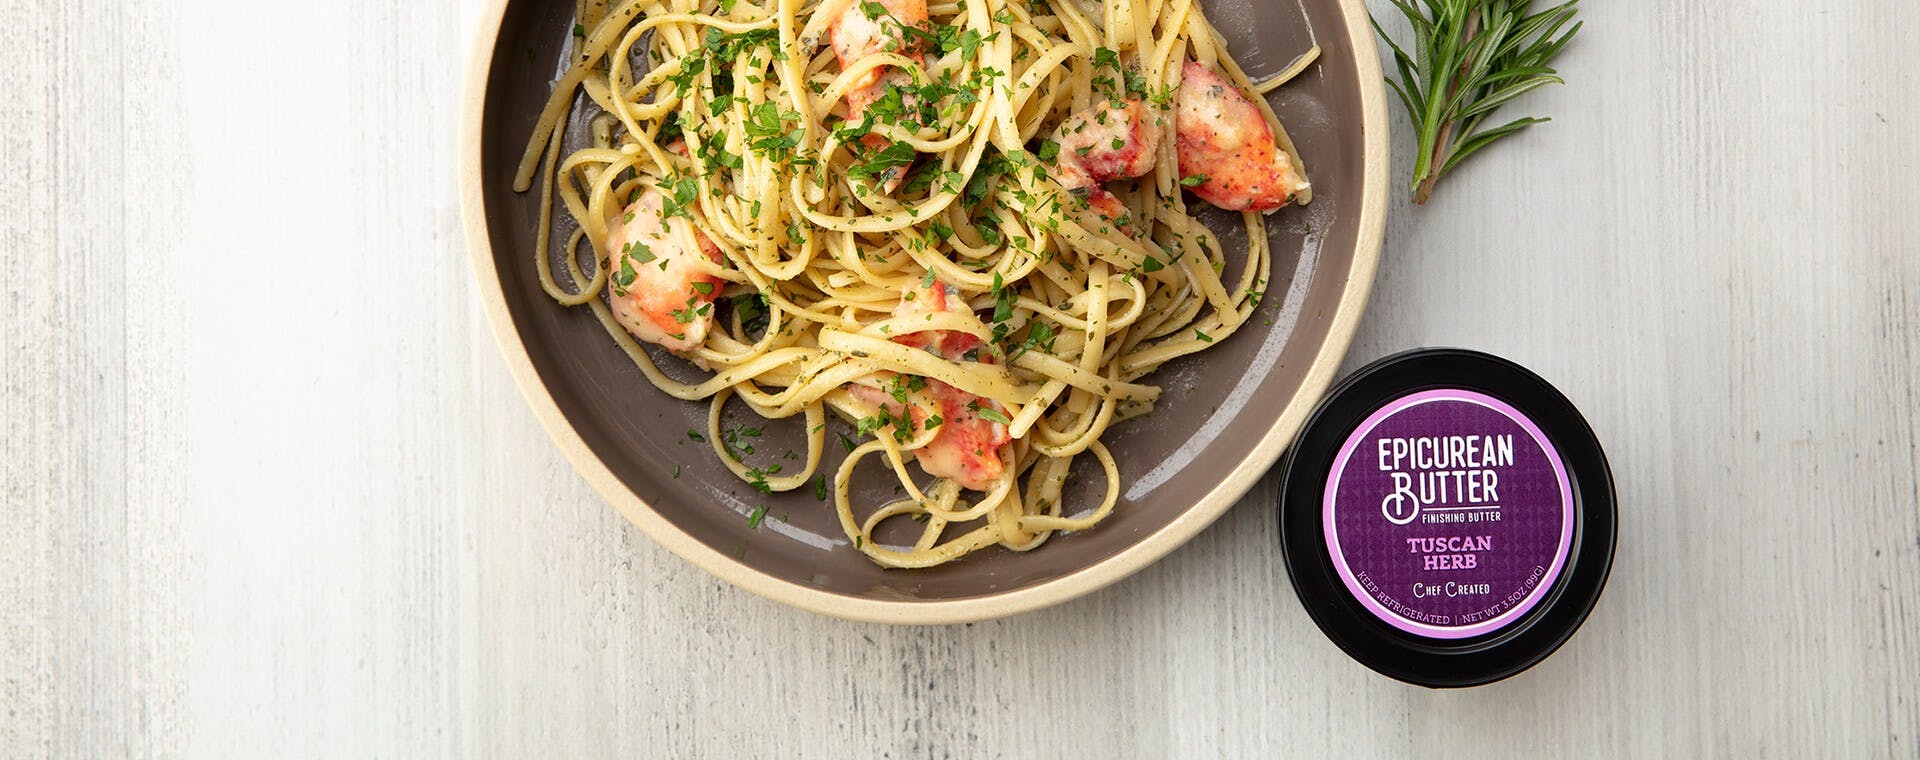 Italian Inspired Pasta With Tuscan Herb Butter